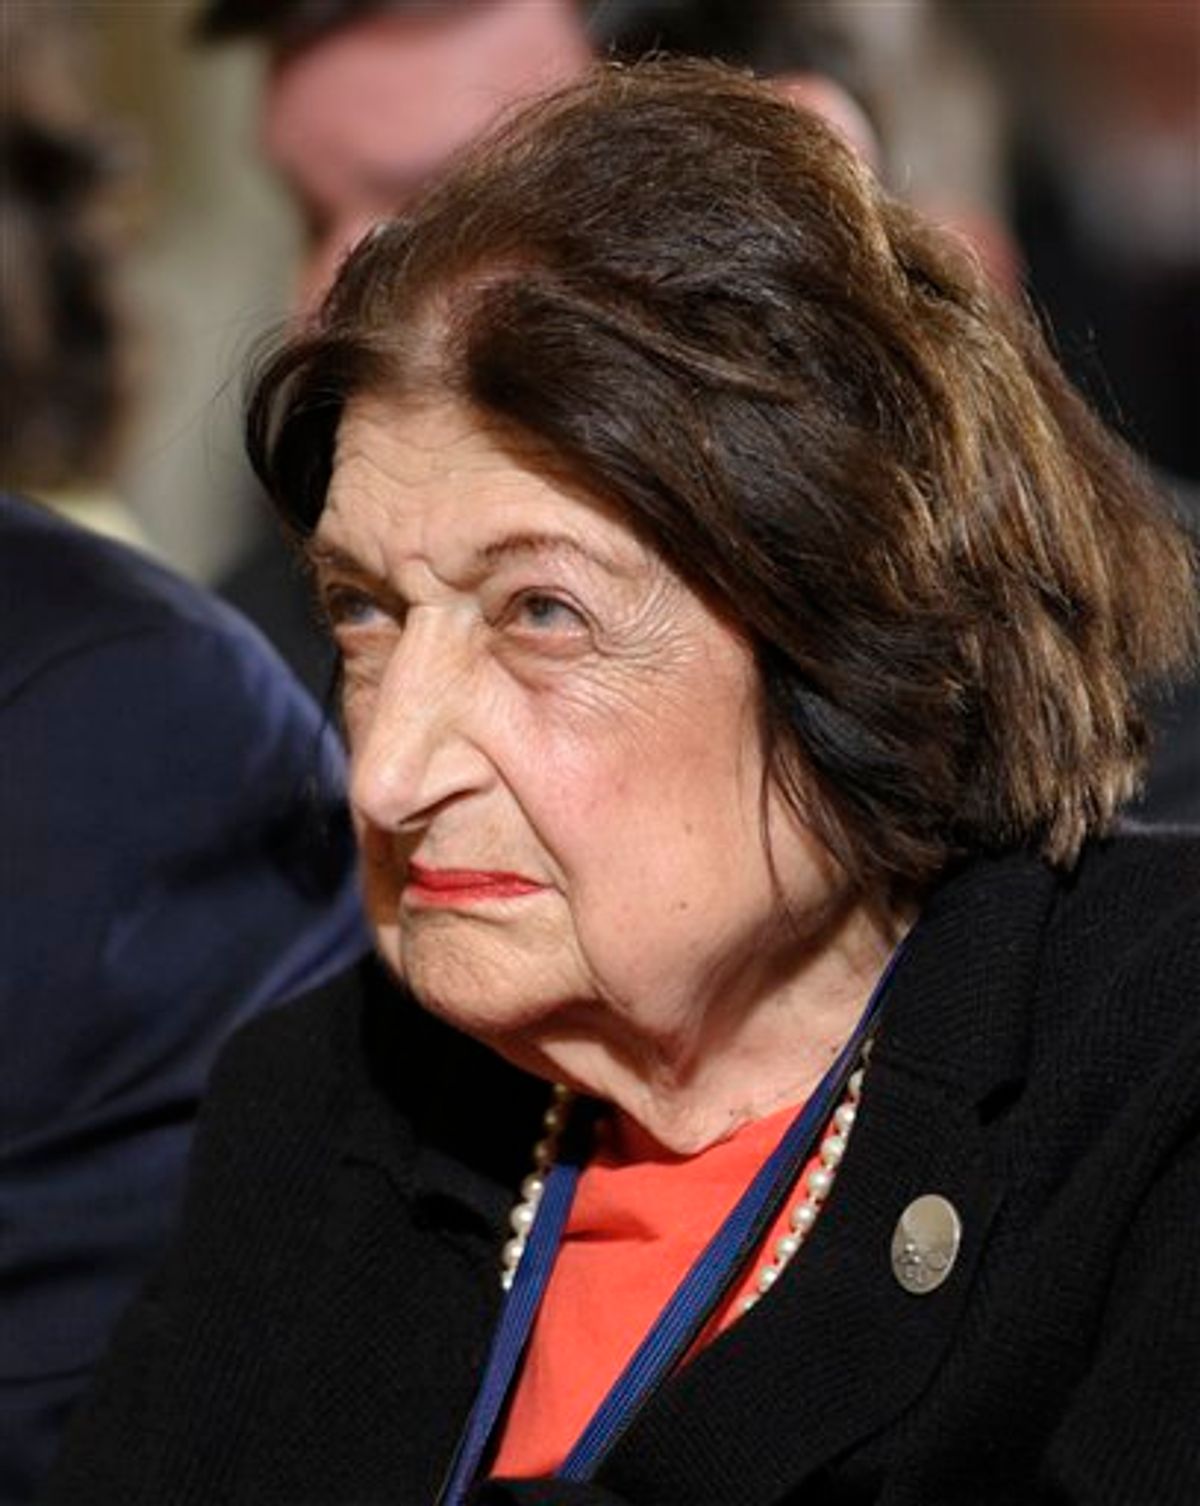 FILE - In this May 27, 2010 file photo, Helen Thomas listens to President Barack Obama during a news conference in the East Room of the White House in Washington. Controversial remarks about Israel by veteran White House reporter Helen Thomas drew sharp criticism from the Obama administration on Monday, as well as the cancellation of a high school graduation speech she was to deliver. White House press secretary Robert Gibbs was asked at his daily briefing with reporters about President Barack Obama's reaction to Thomas' remarks. Gibbs called them "offensive and reprehensible." (AP Photo/Susan Walsh, File) (AP)